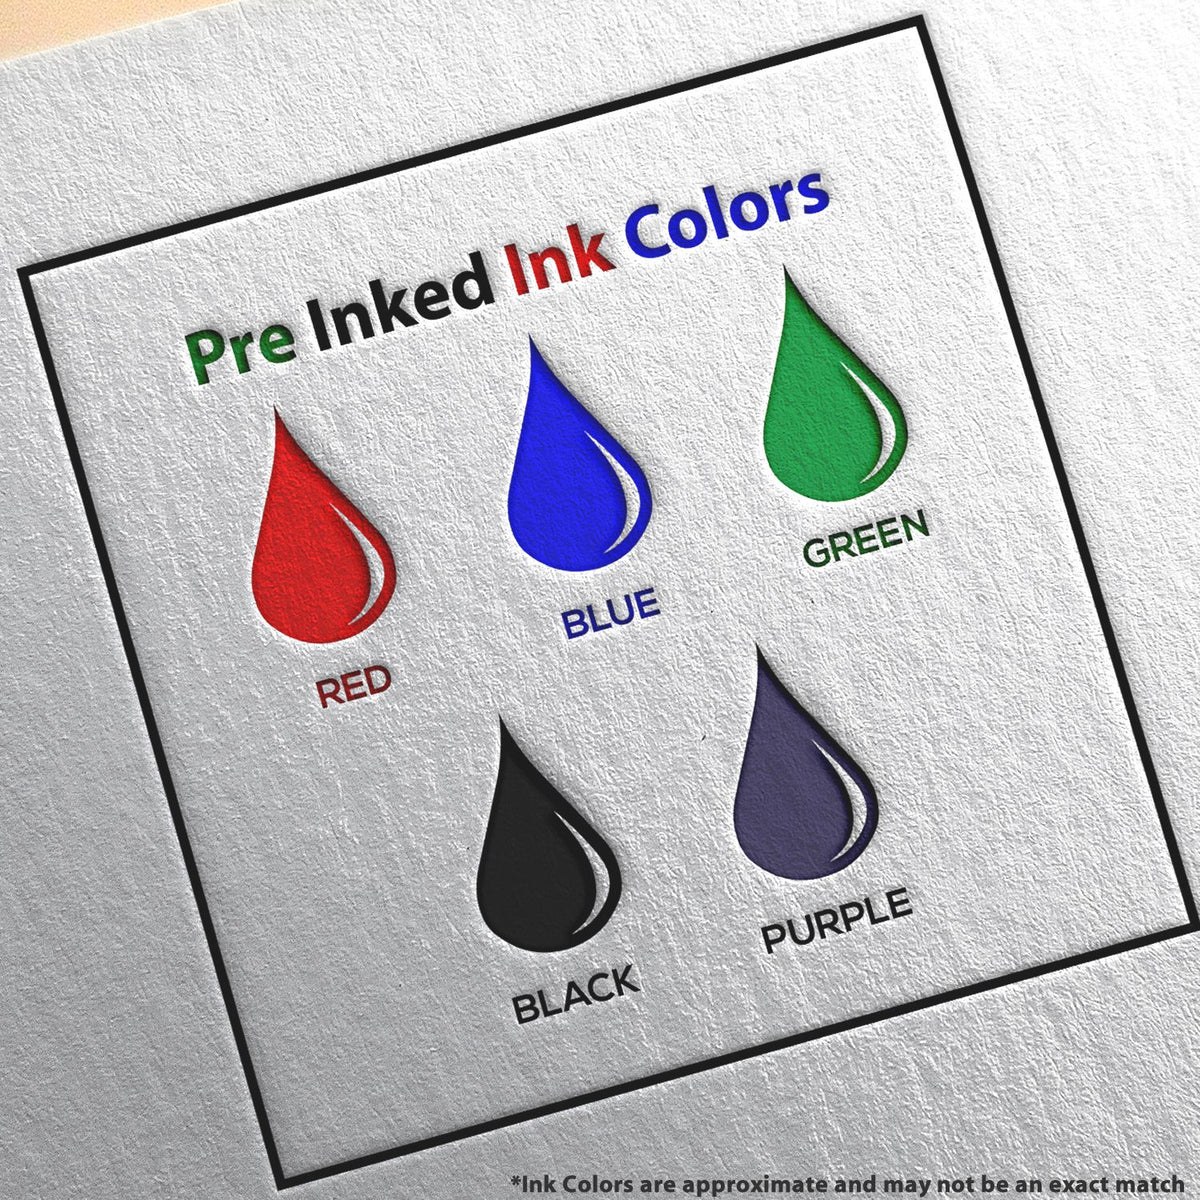 A picture showing the different ink colors or hues available for the Super Slim Indiana Notary Public Stamp product.